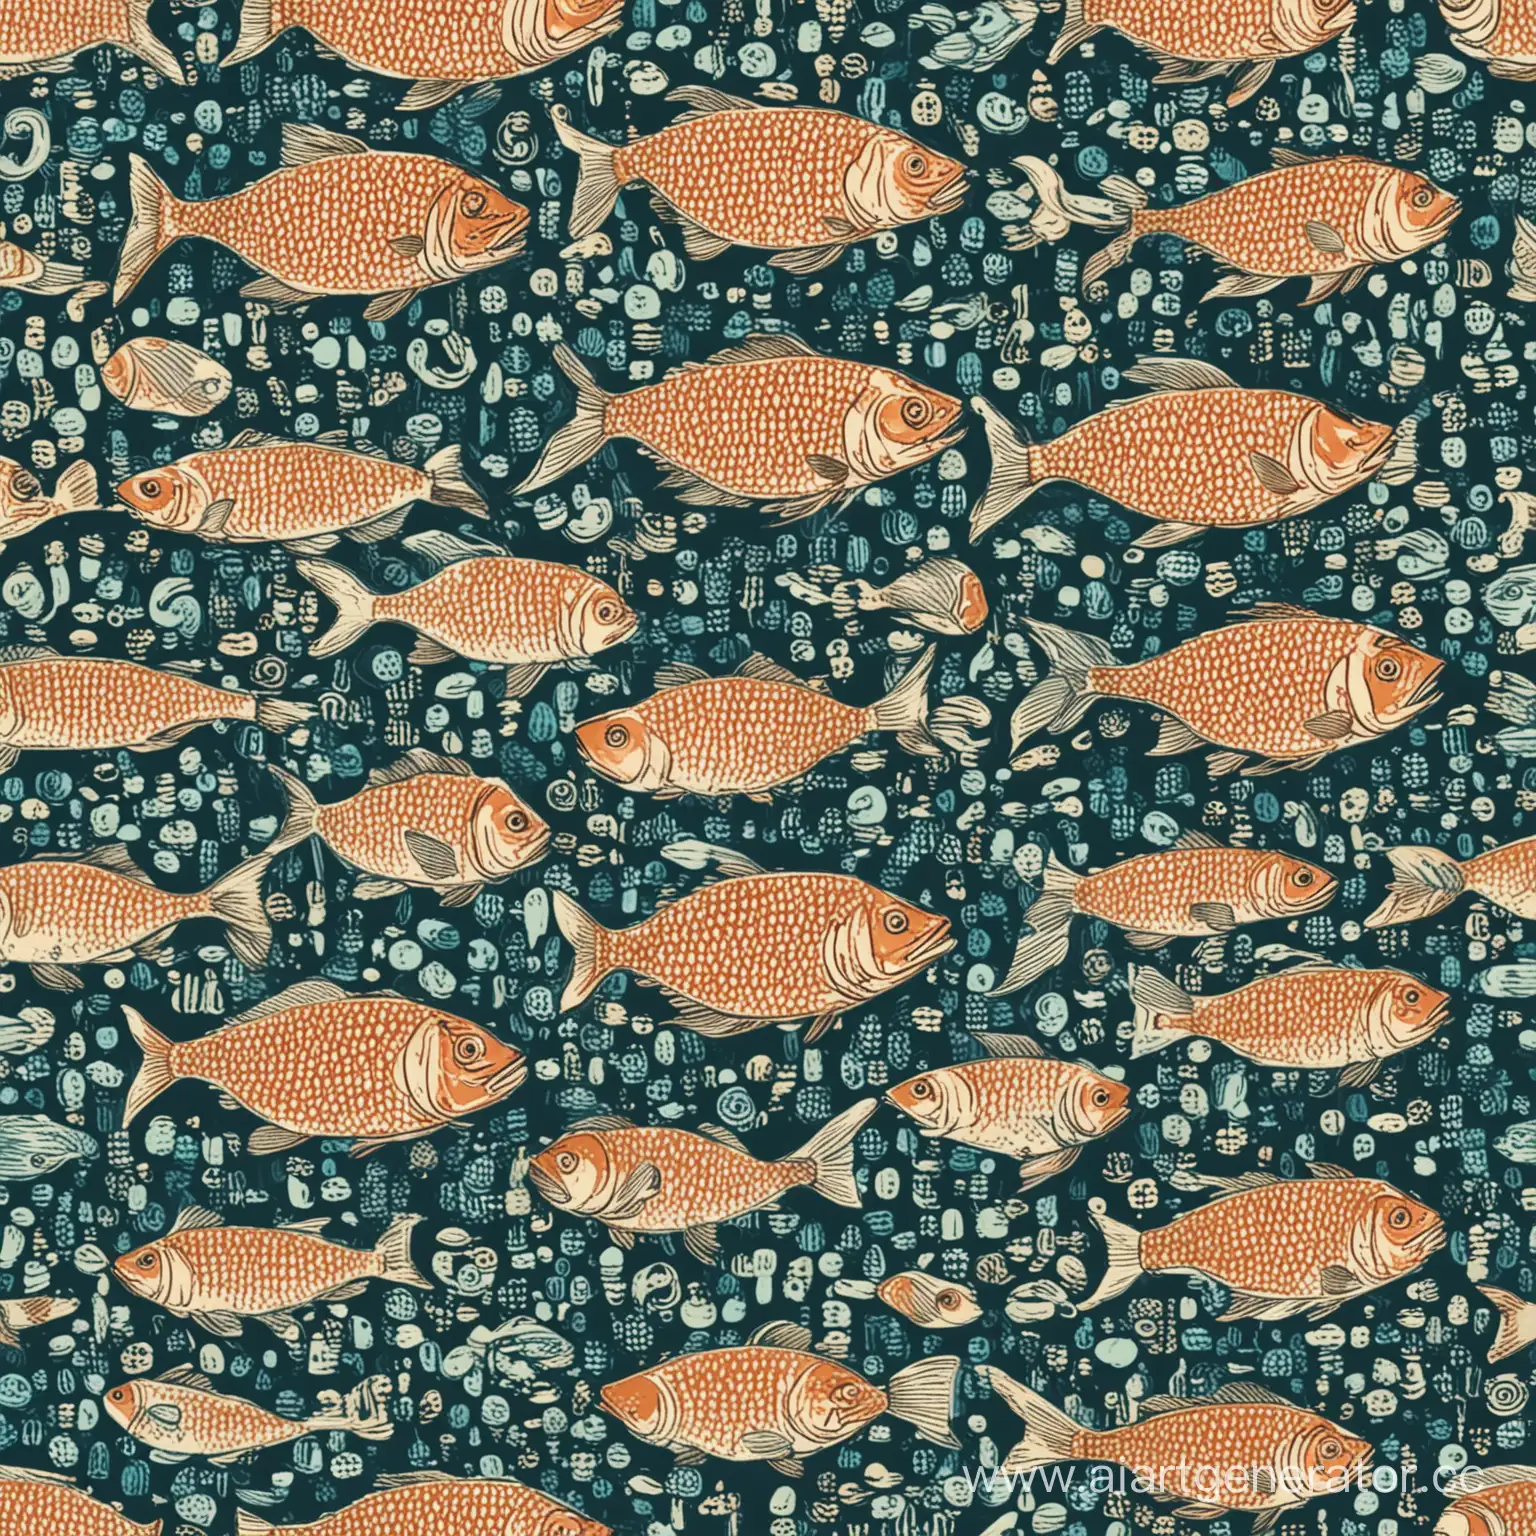 Repeating-Marine-Life-Pattern-in-Cyclic-Design